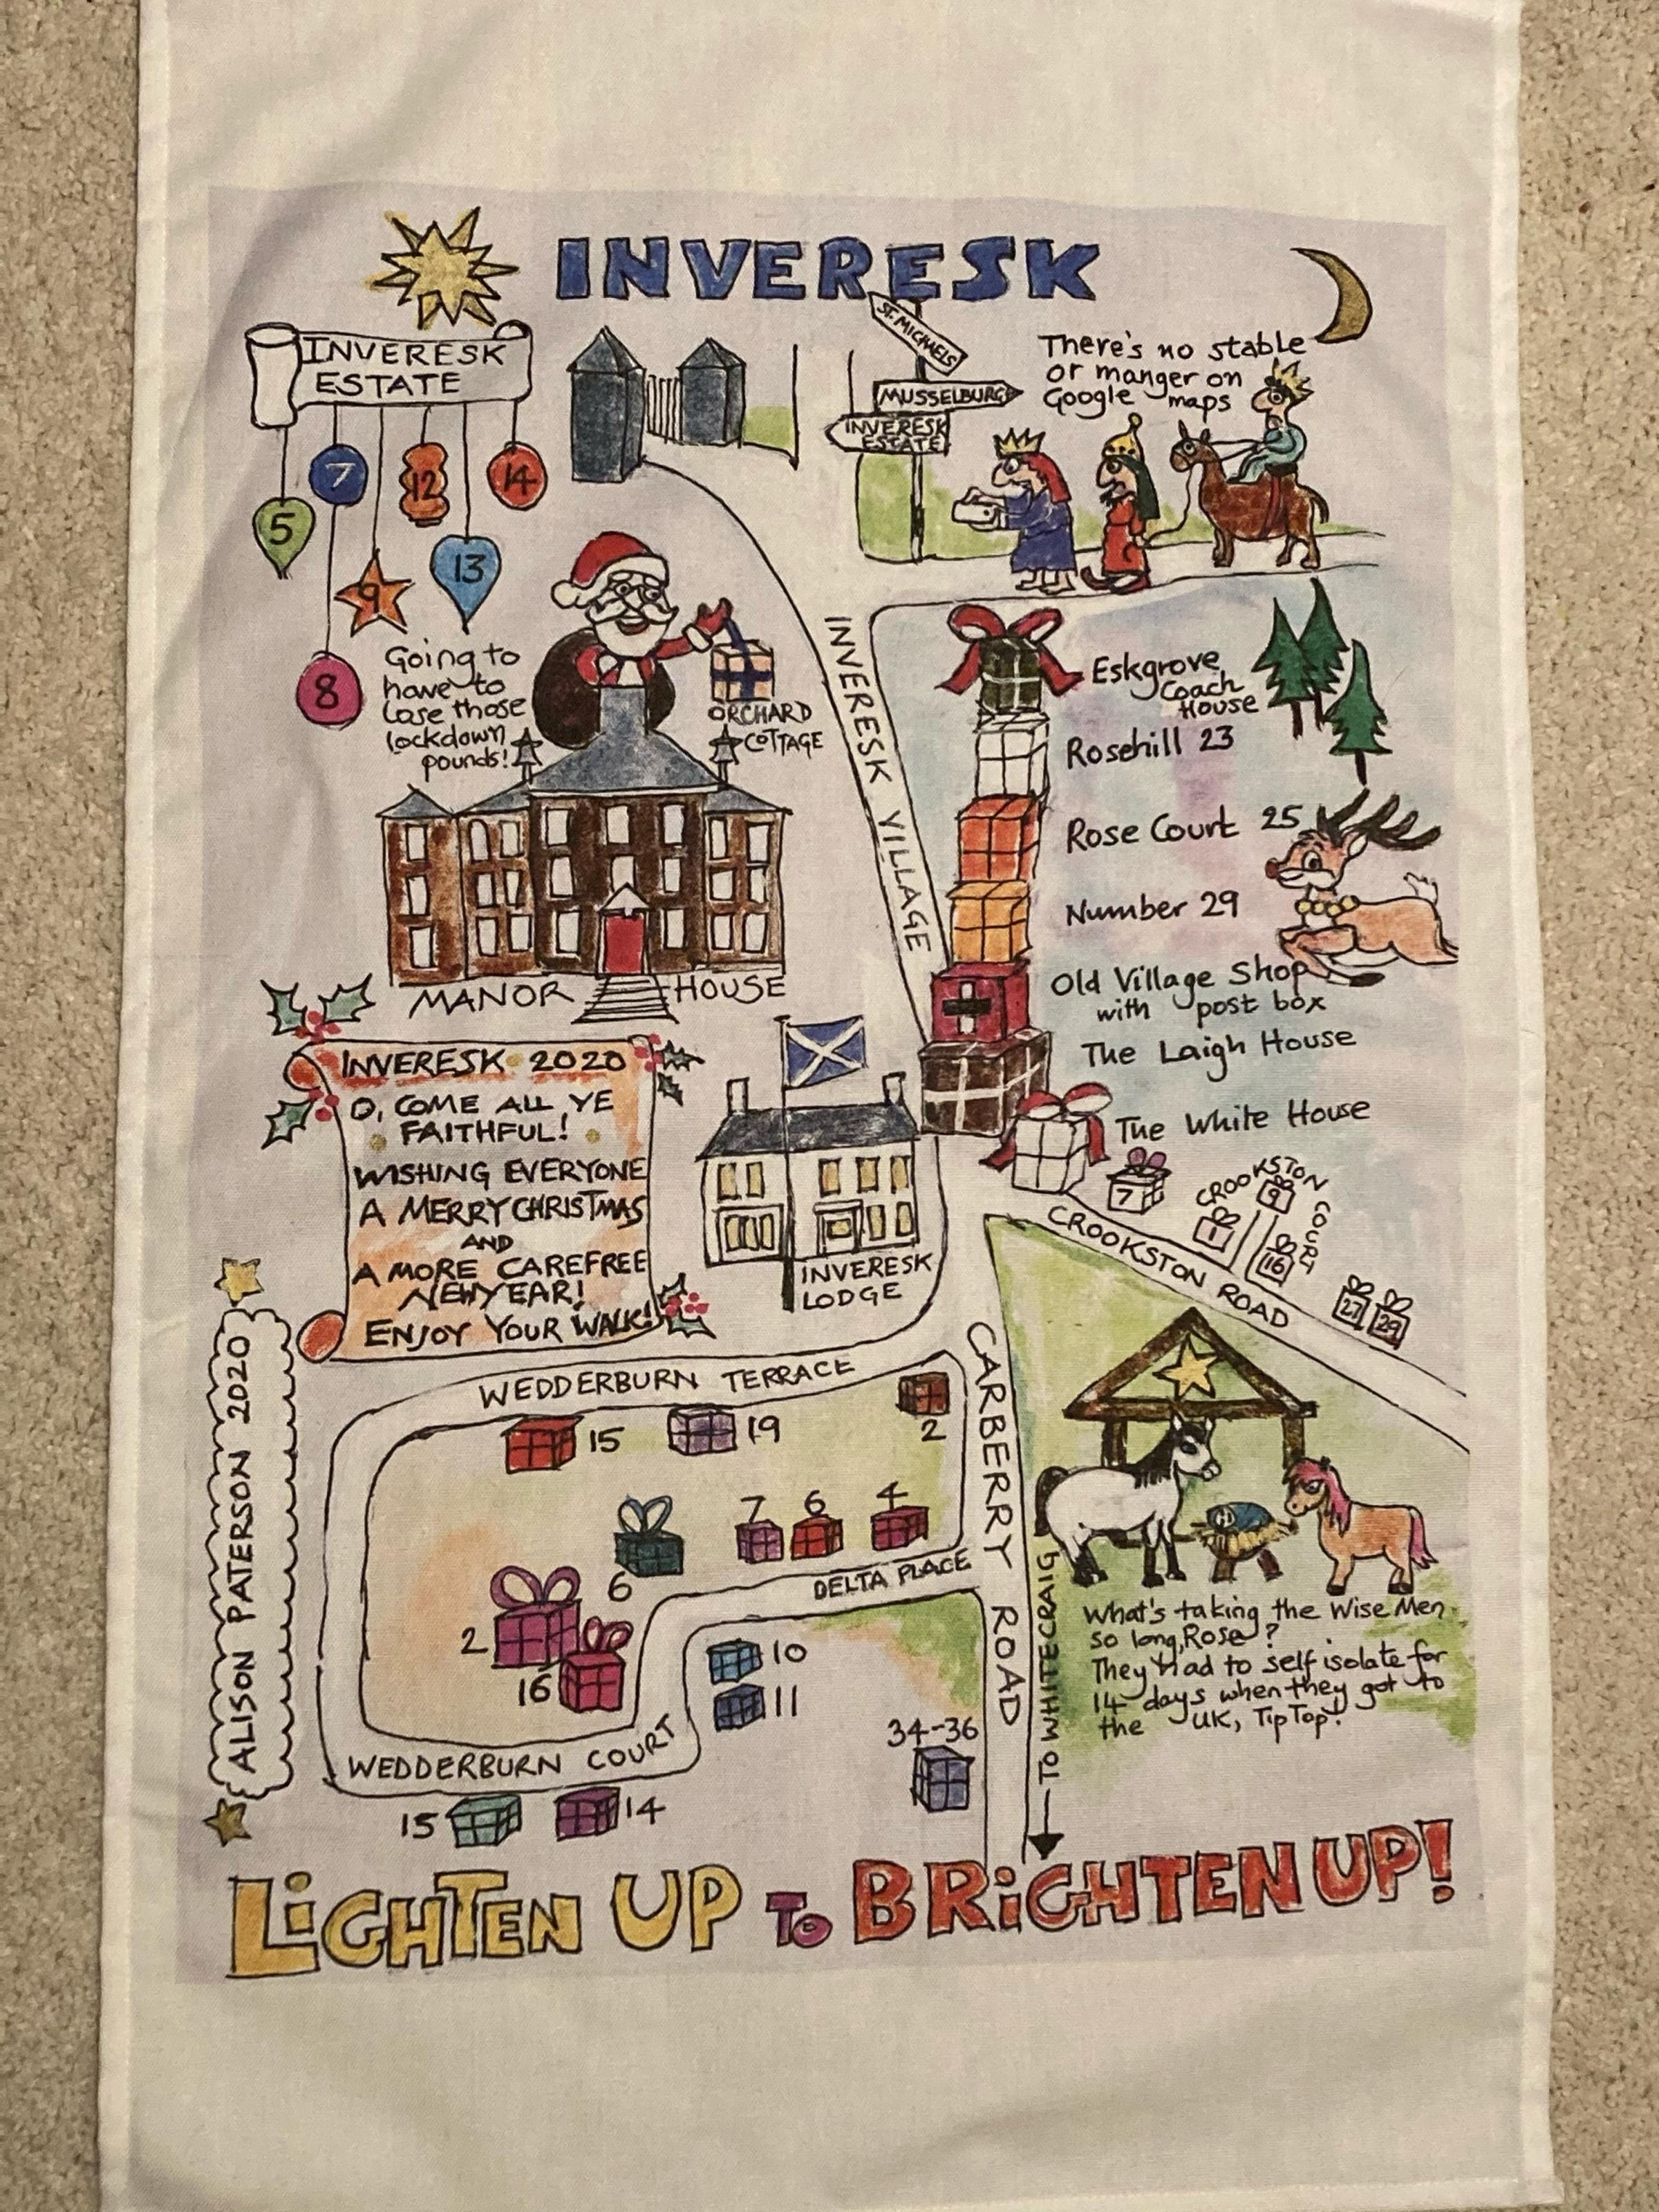 A tea towel showing local artist Alison Patersons work for Lighten Up to Brighten Up Inveresk